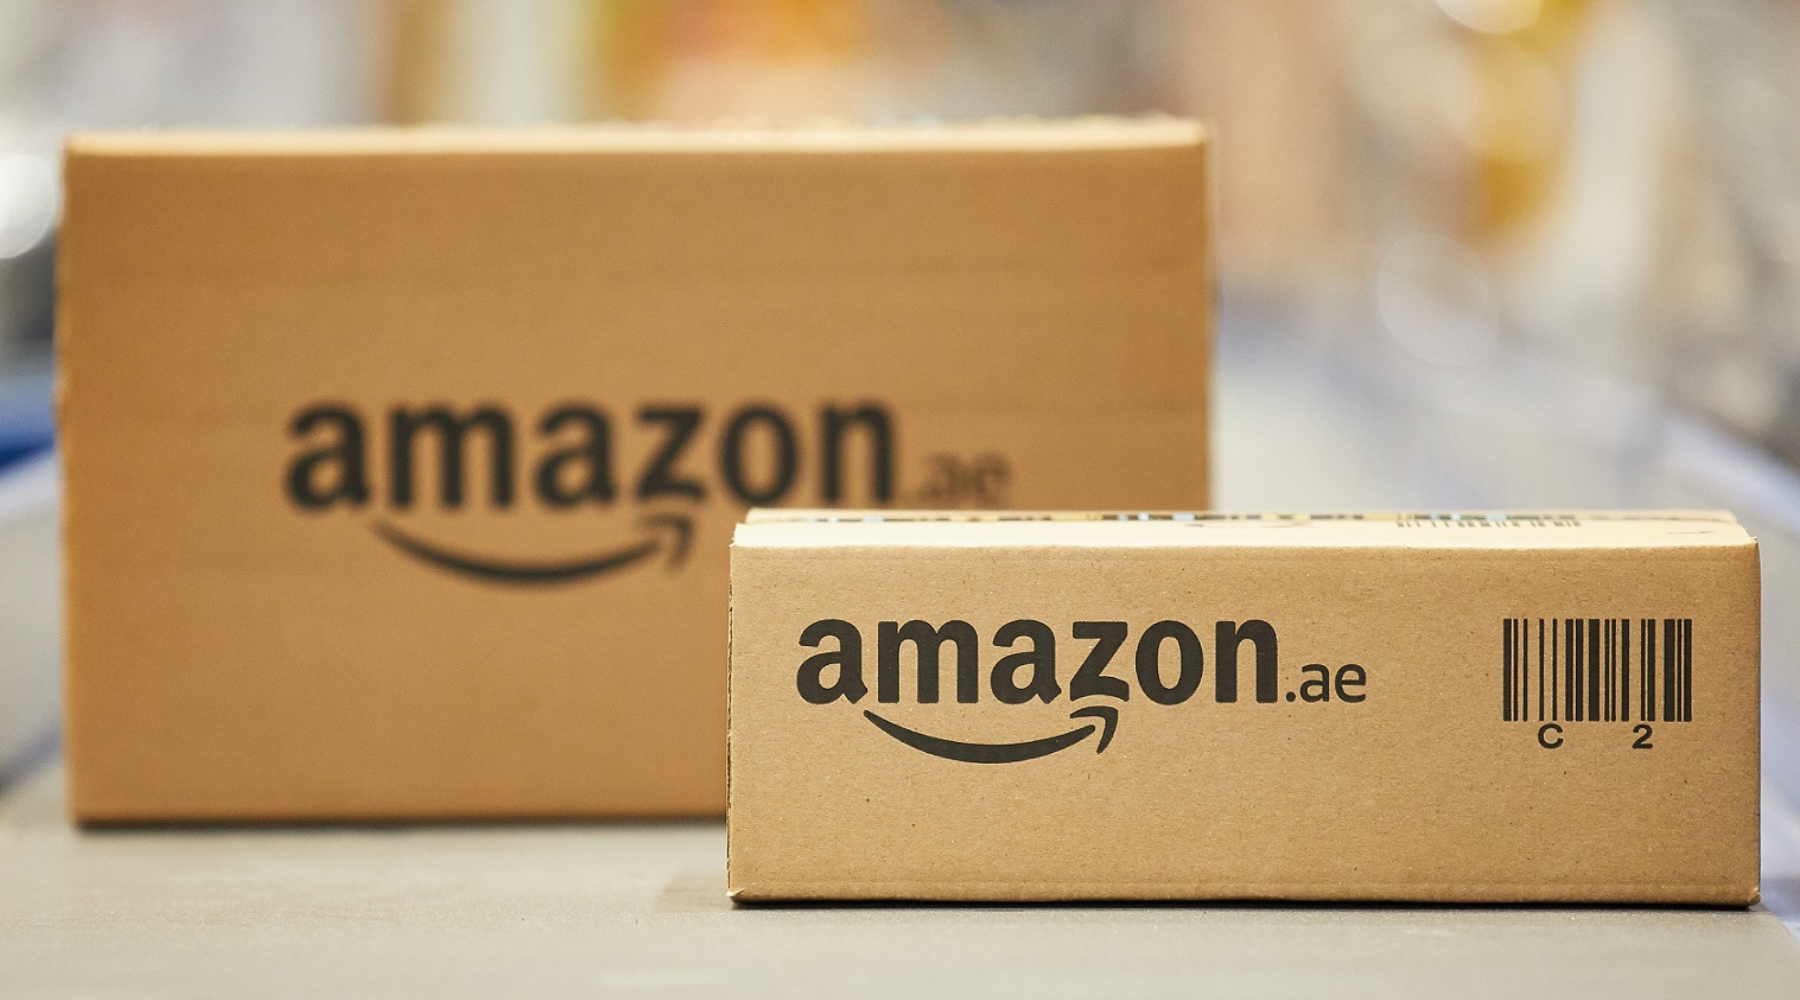 Customers in Qatar Can Now Shop on Amazon.ae Through the International Shopping Experience